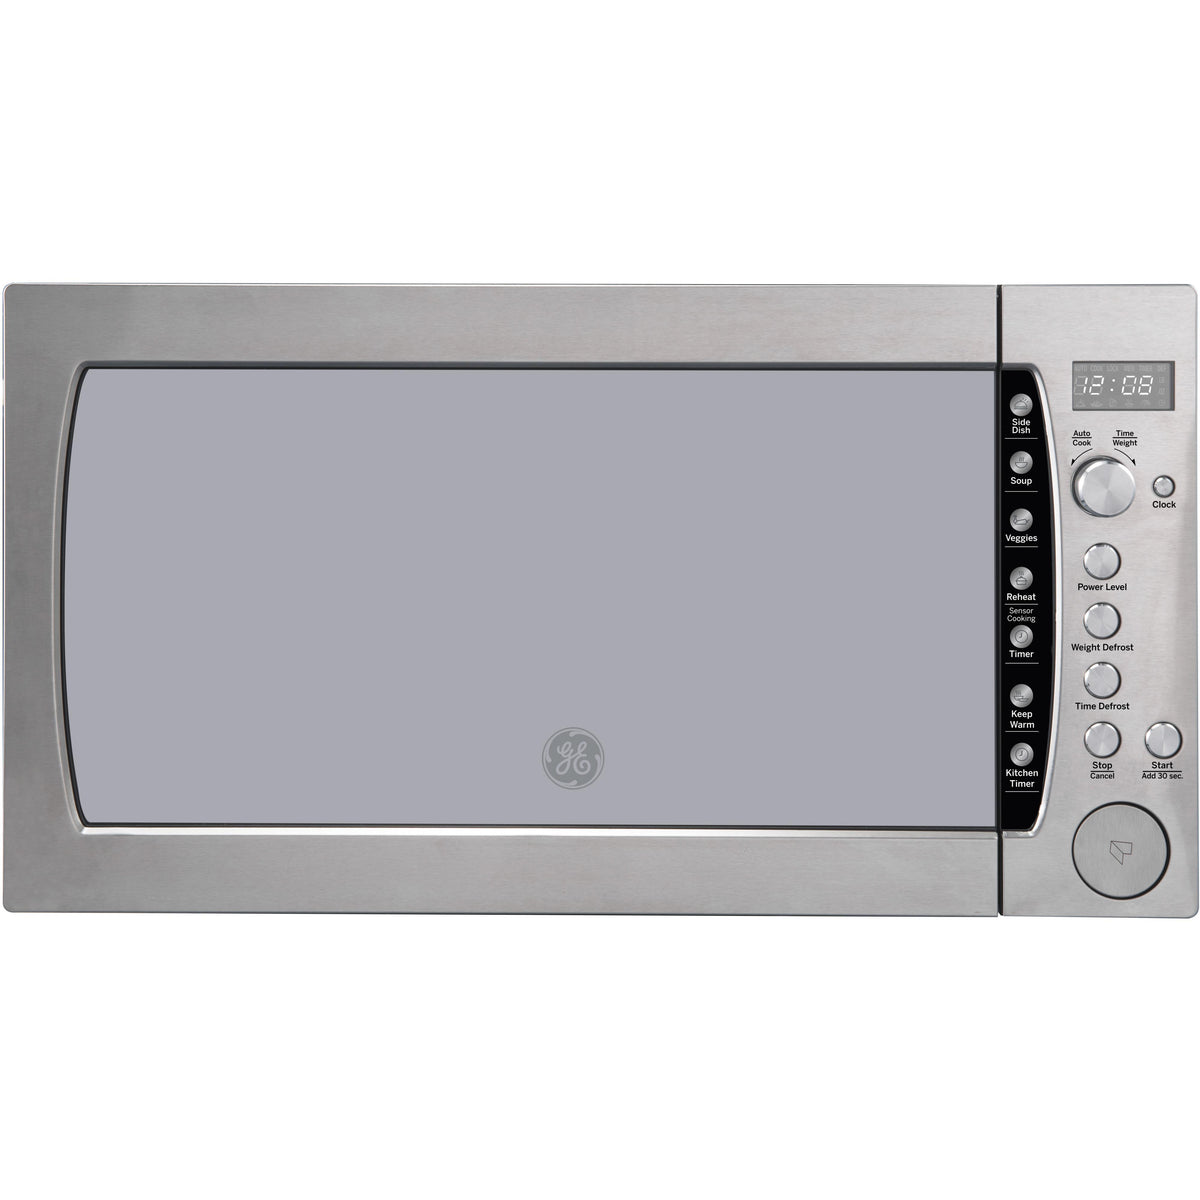 2.2 cu. ft. Countertop Microwave Oven PEB3228RMSS IMAGE 1